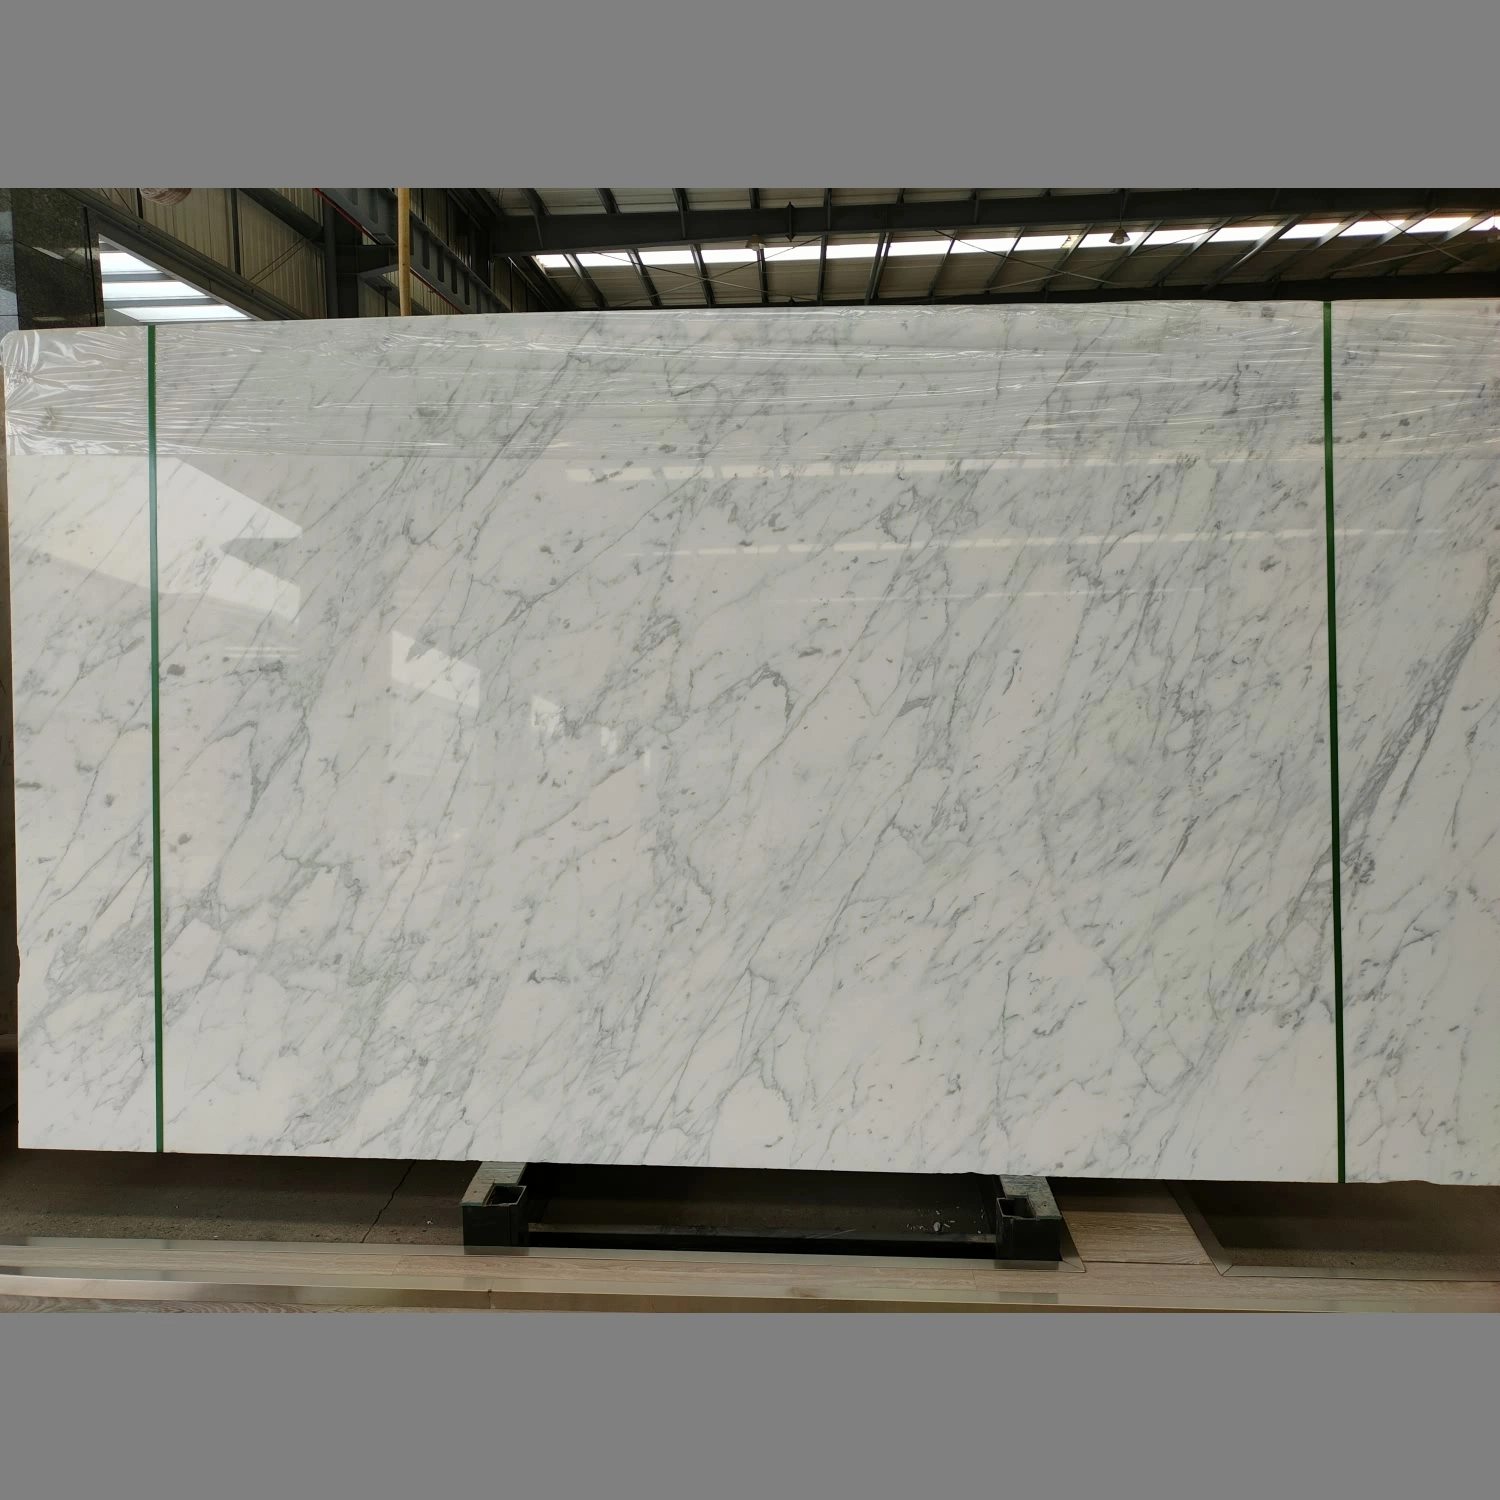 Natural White/Black/Yellow/Beige/Red/Green/Brown/Blue/Pink/Grey/Gold Polished/Honed Panda Marble for Floor/Wall Slabs/Tiles/Stairs/Mosaic/Vanity Top Decoration